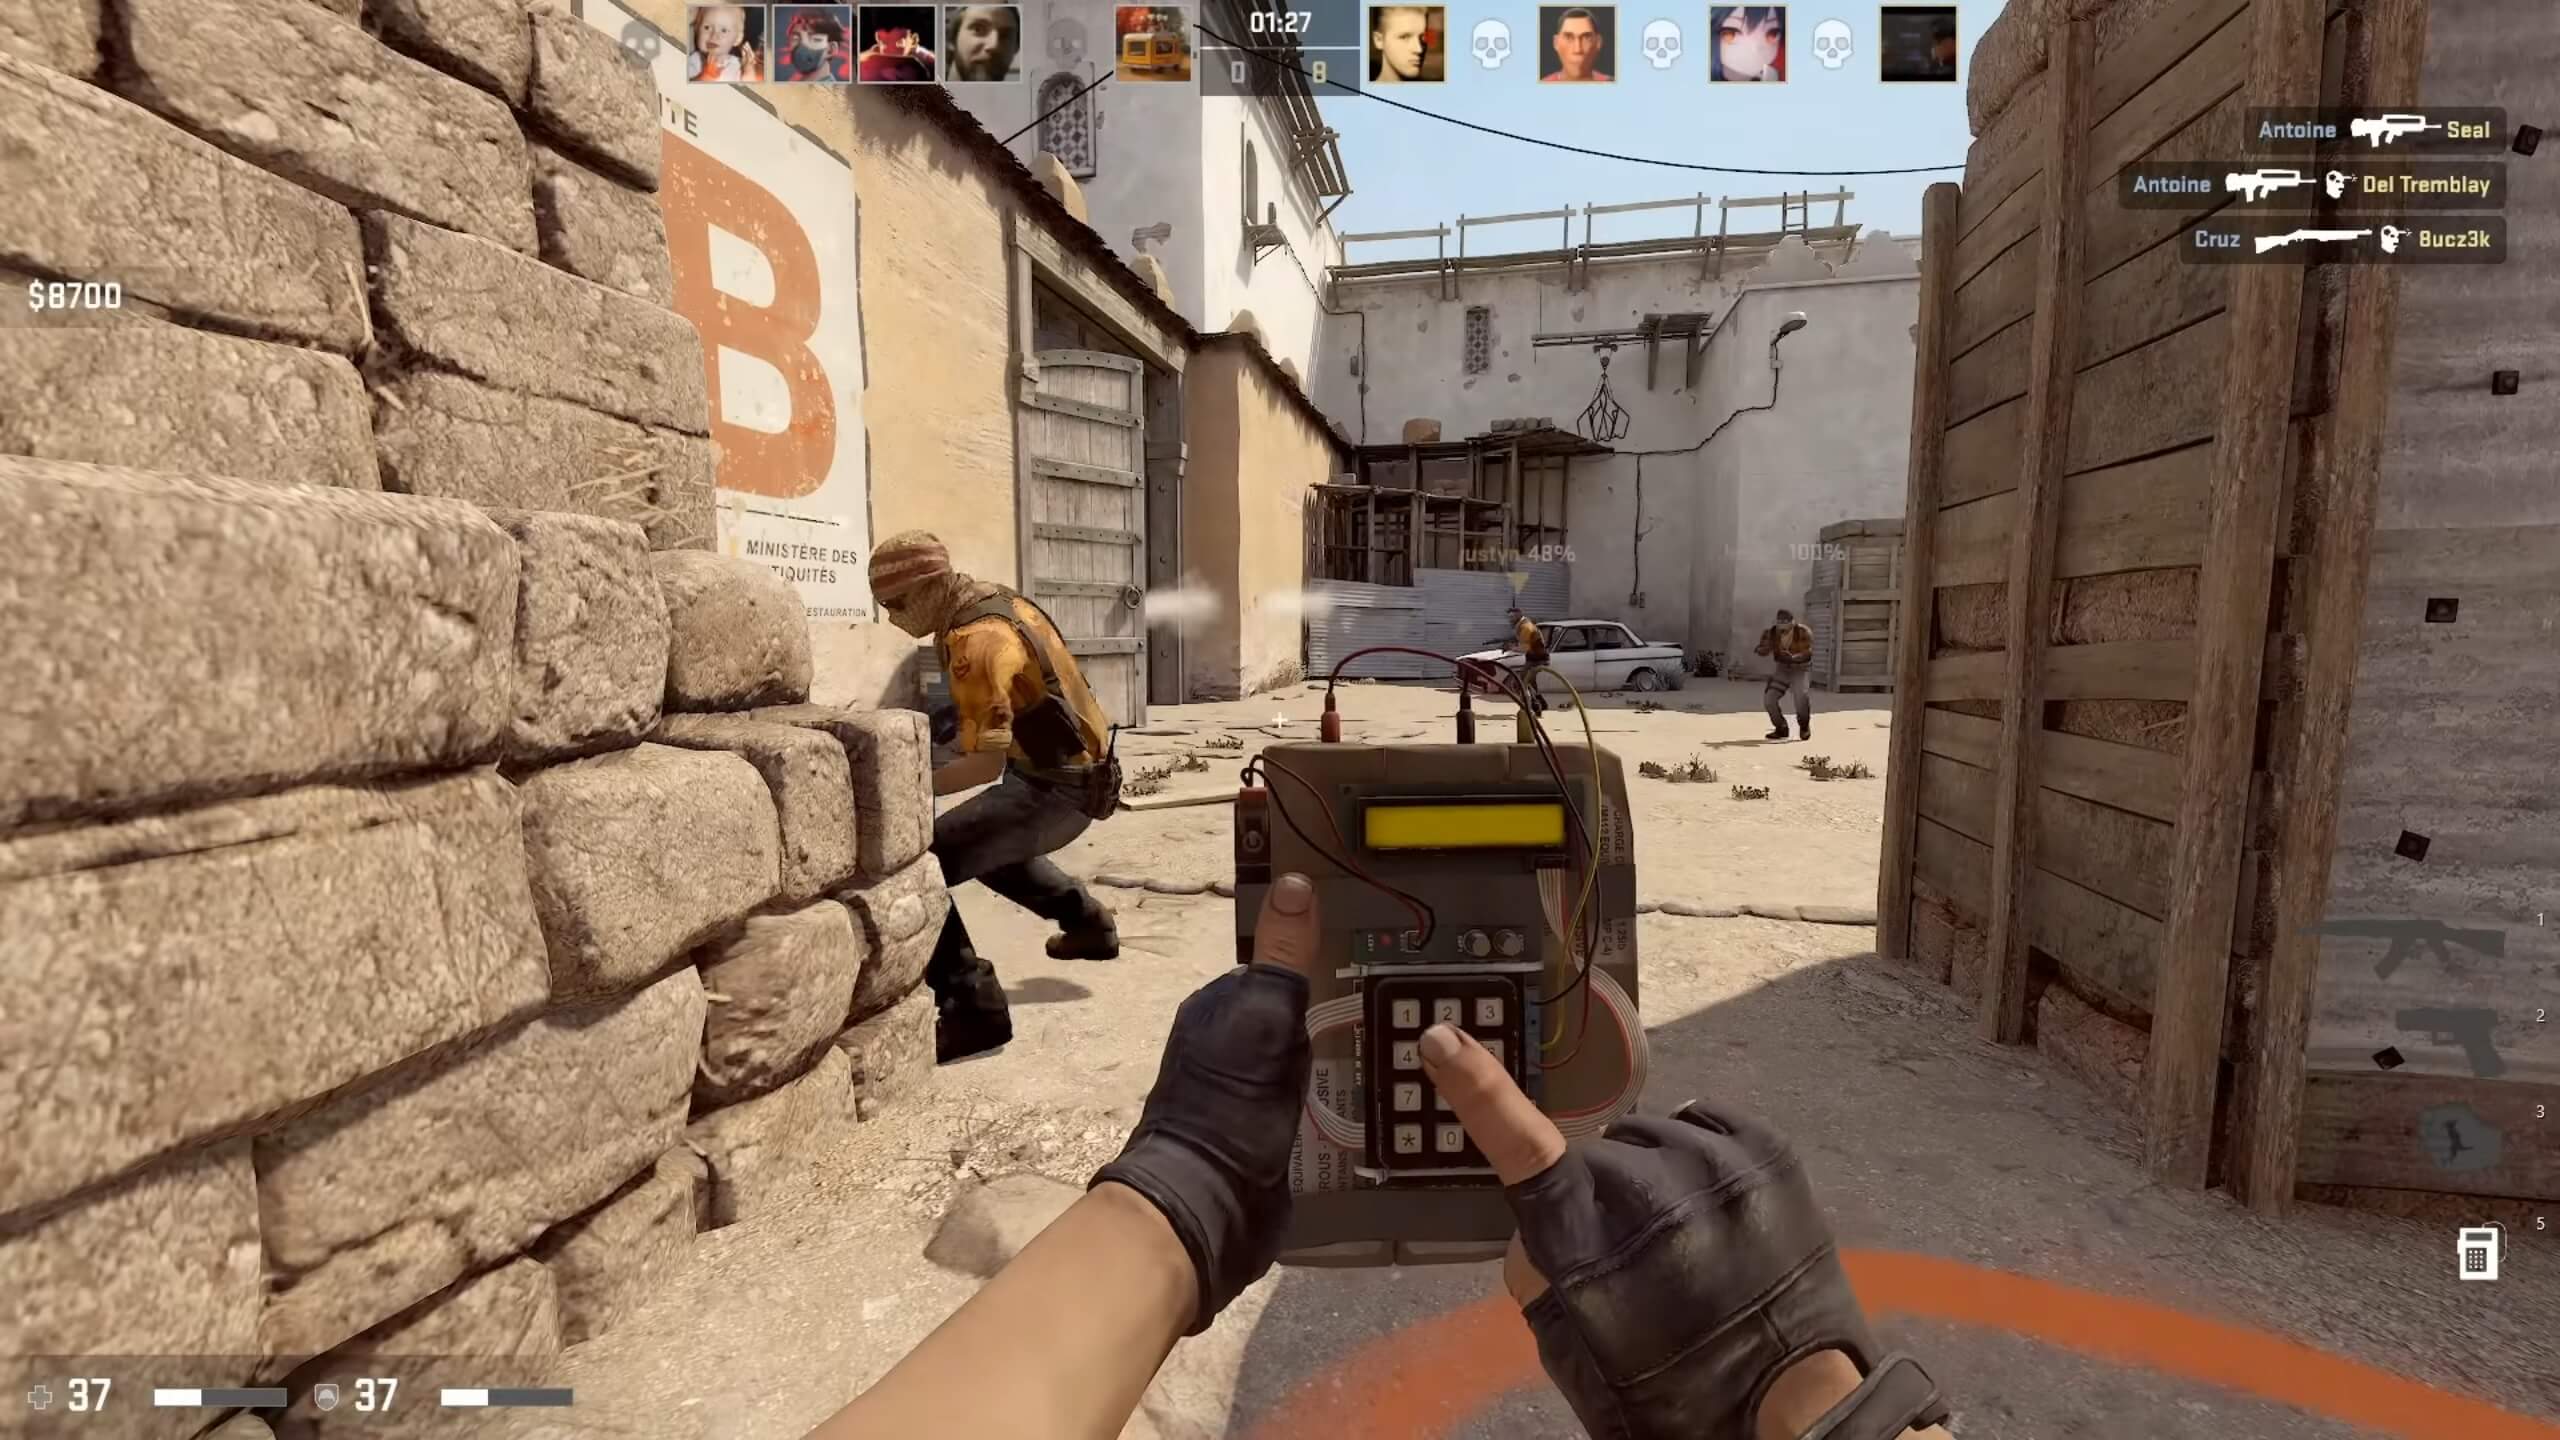 A First Look At CS:GO Source 2 Gameplay! 